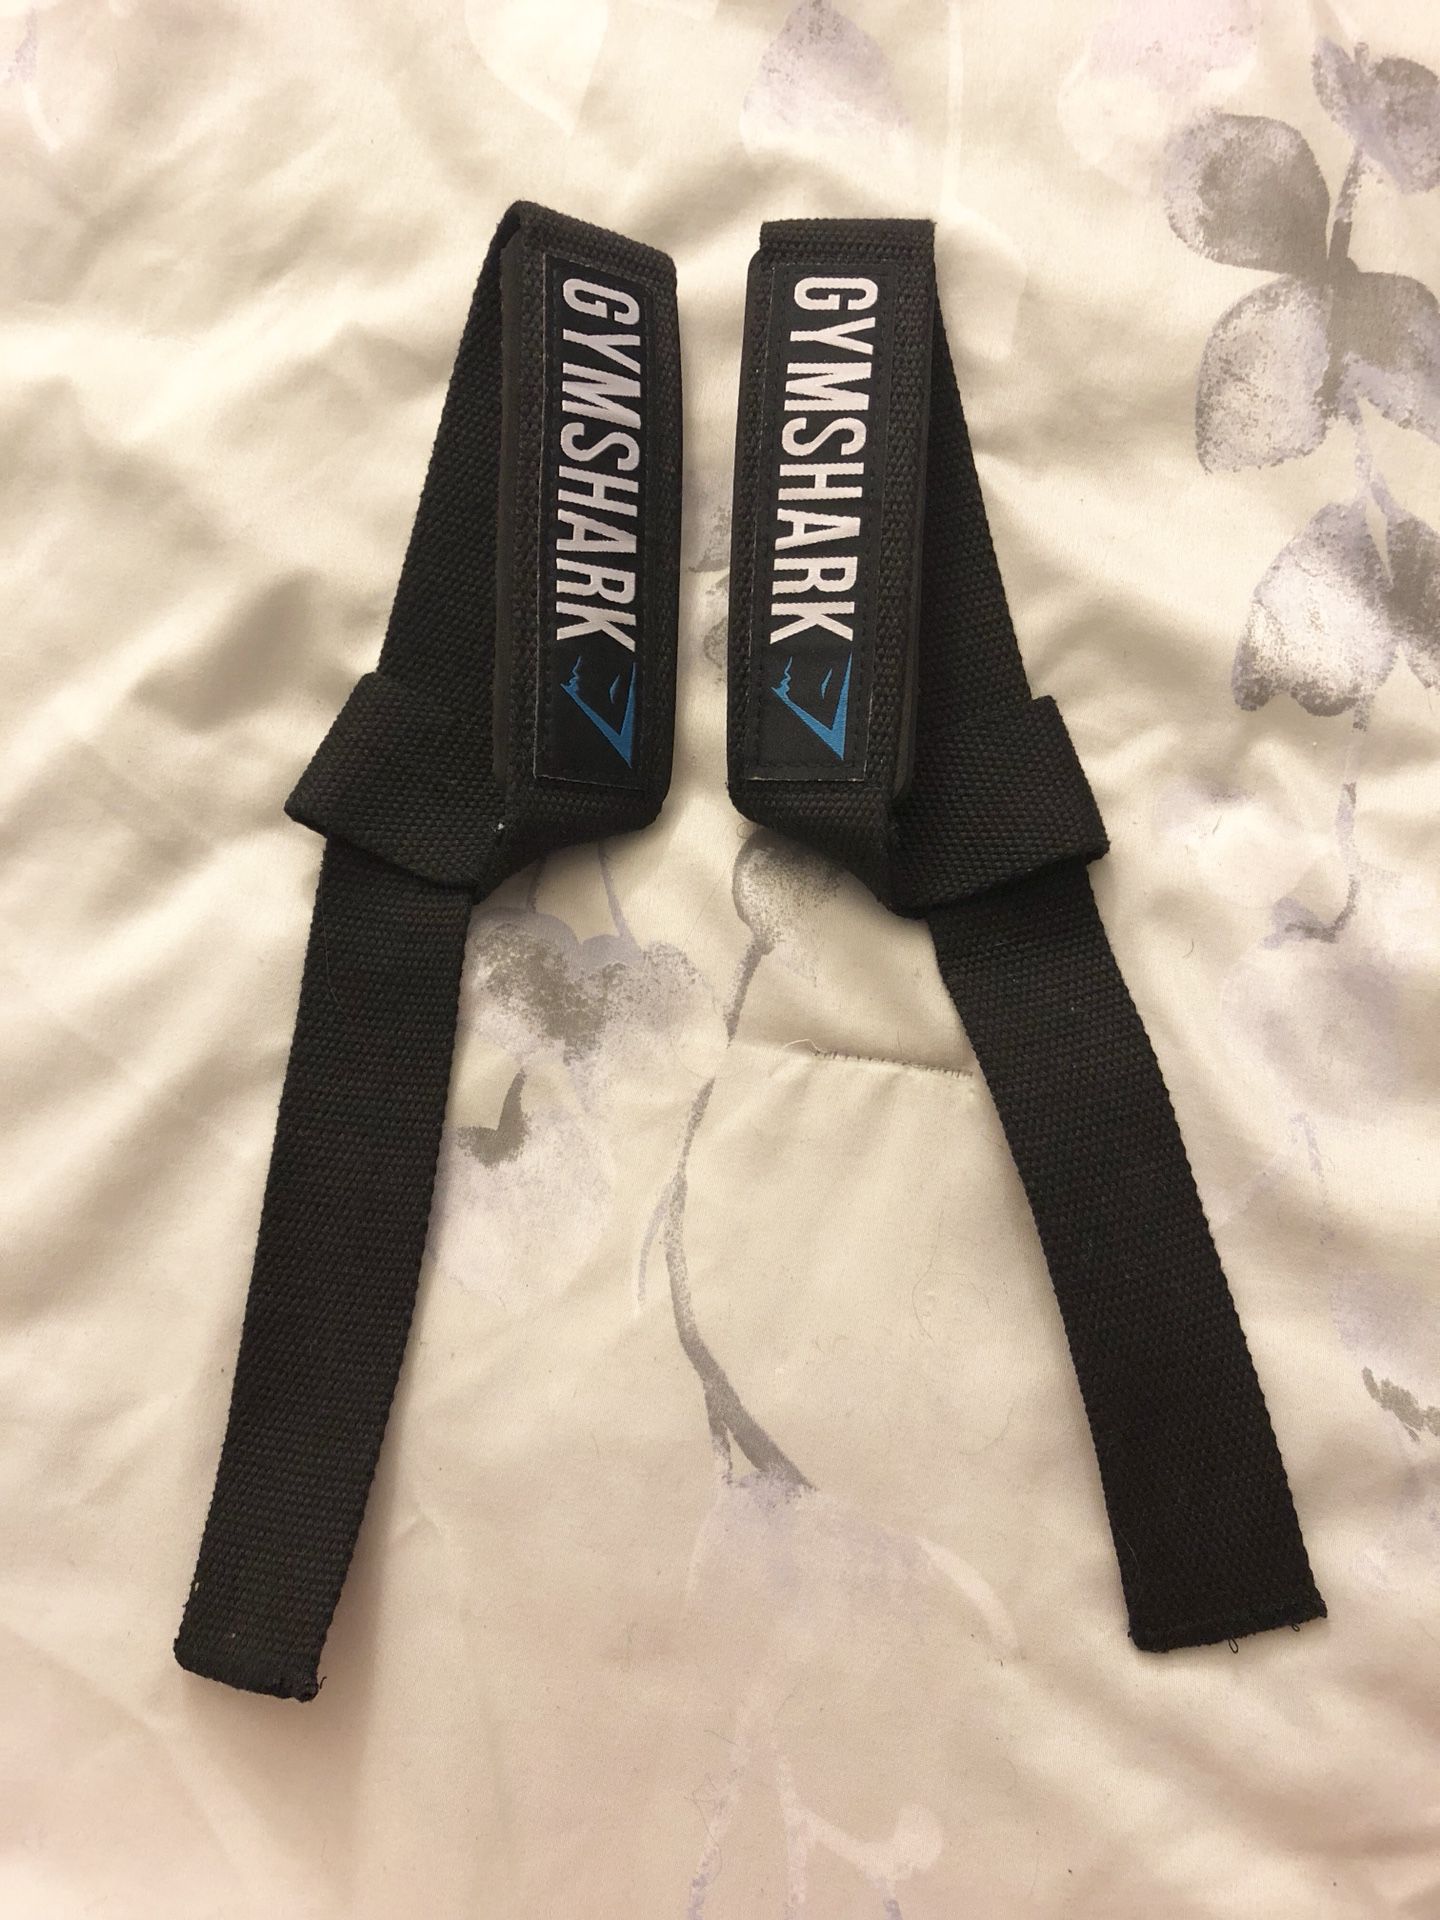 Gymshark padded lifting straps for Sale in National City, CA - OfferUp